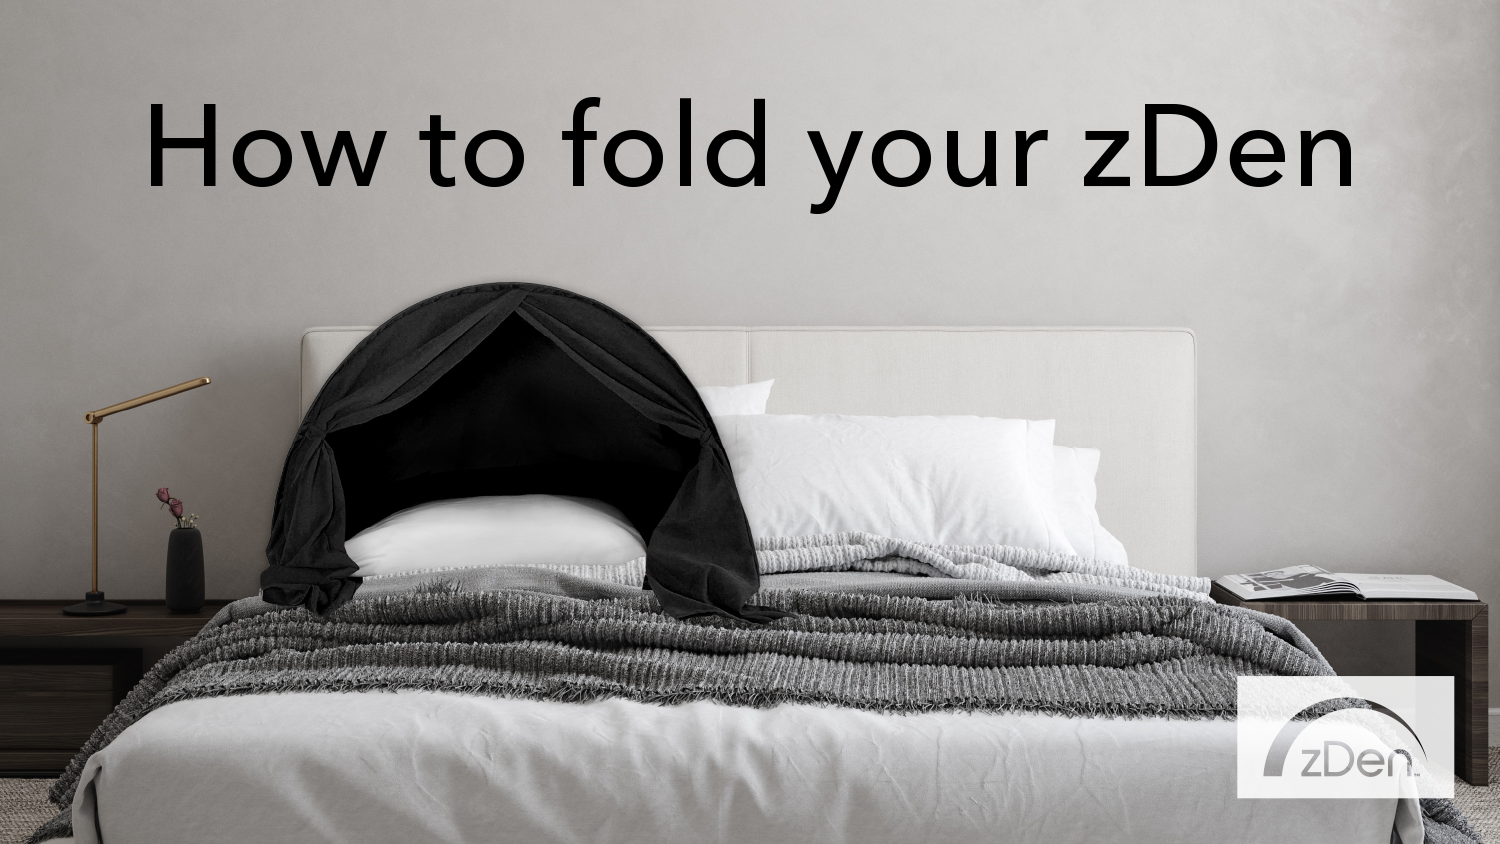 Load video: zDen is easy to fold when following these 5 steps. zDen creates a dark and peaceful sleeping environment to improve your sleep quality. It blocks over 99% of light, helping you fall asleep faster, sleep deeper, and wake up feeling refreshed. Great for migraine recovery or for those who work the nightshift